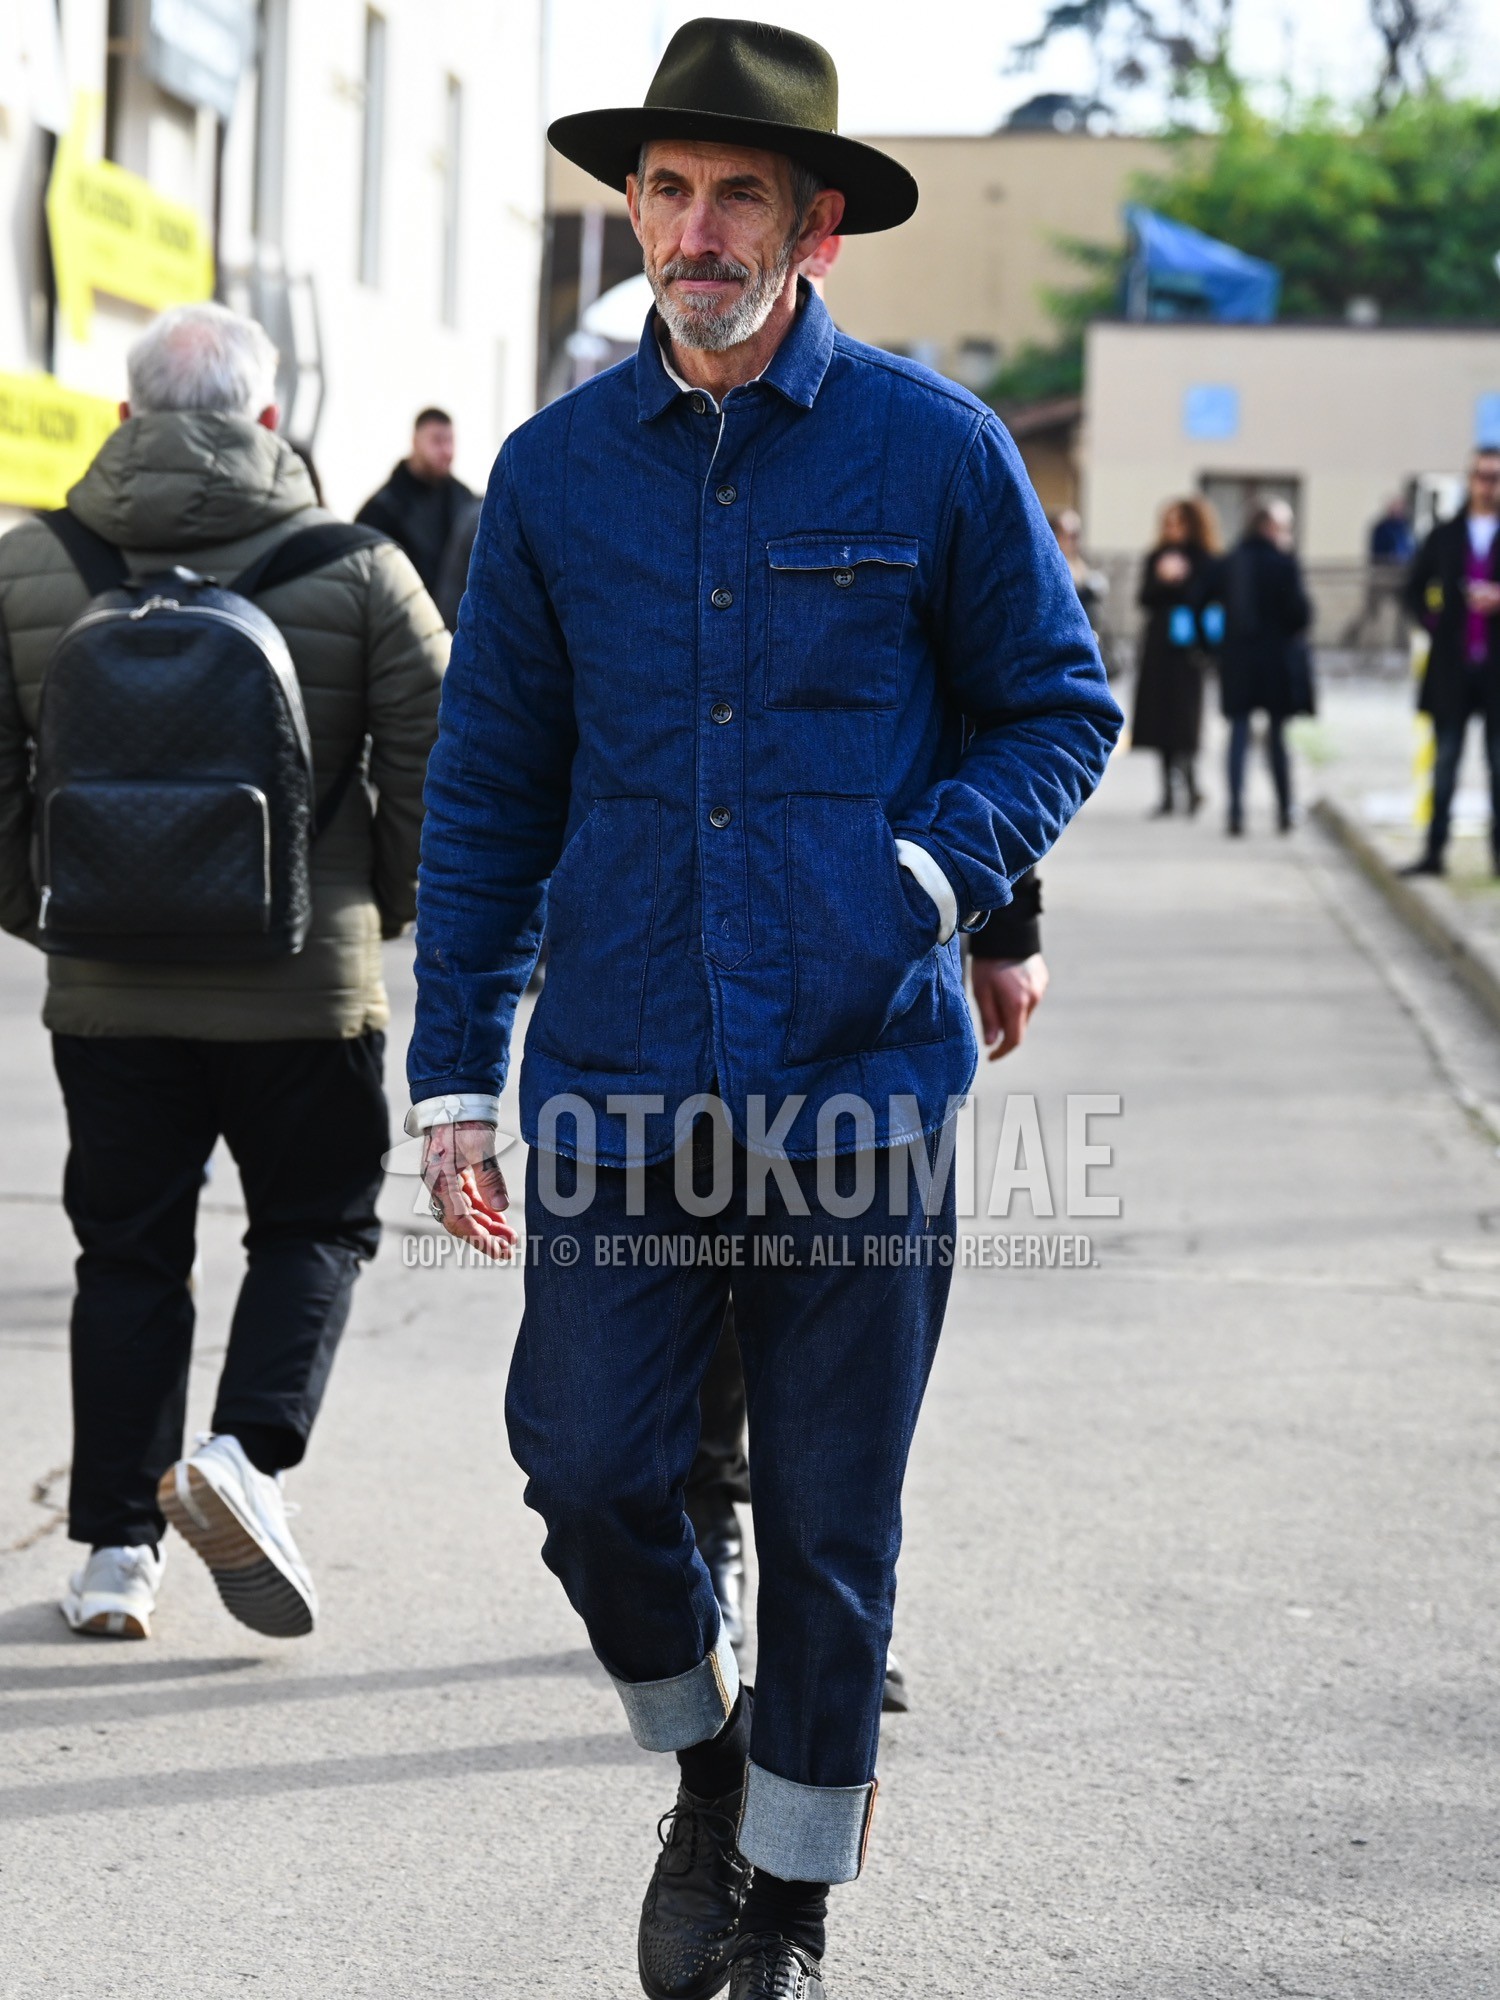 Men's spring autumn winter outfit with olive green plain hat, blue plain field jacket/hunting jacket, blue plain denim/jeans, black plain socks, black brogue shoes leather shoes.